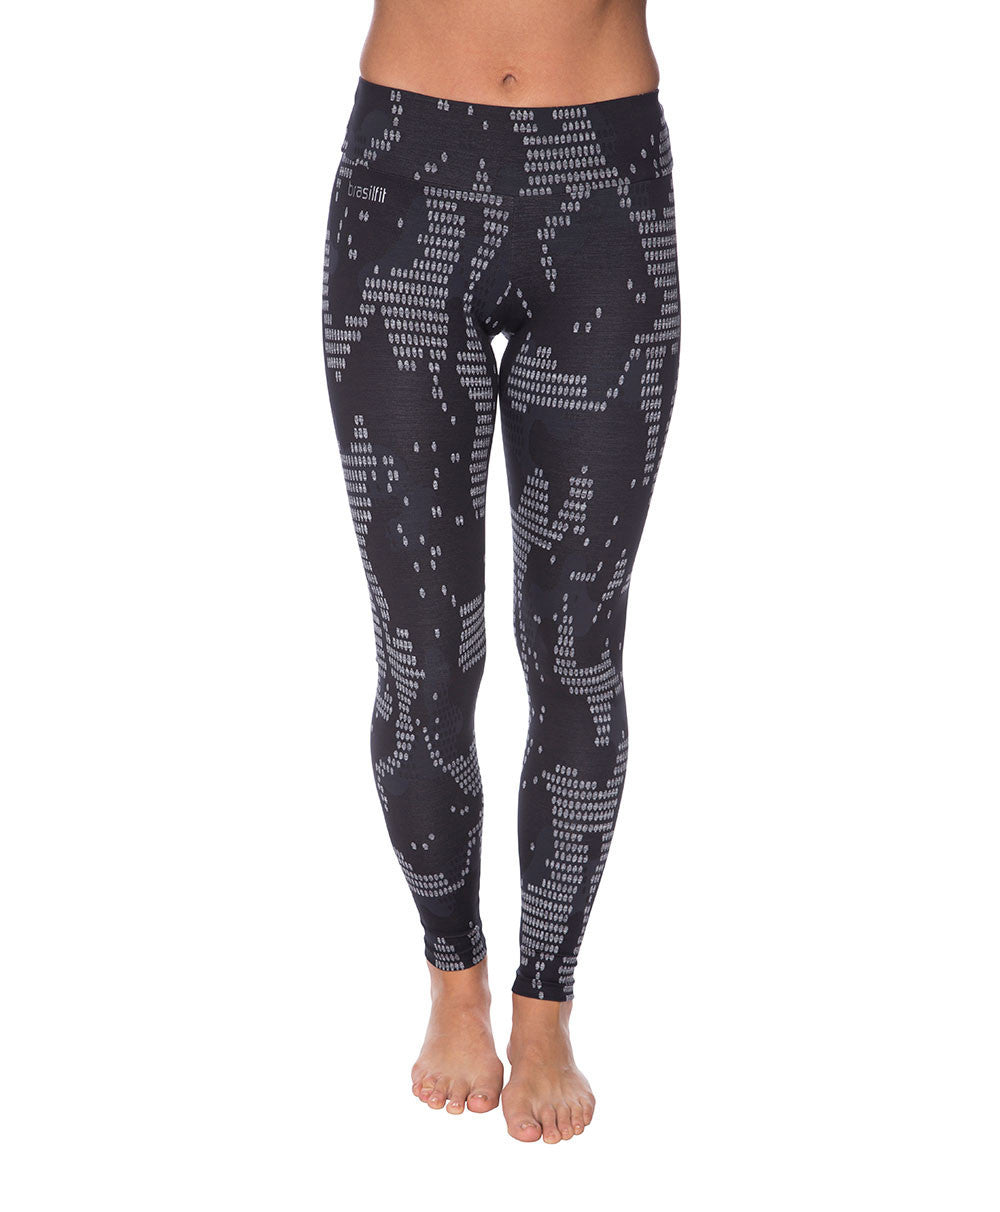 Side view product image for Brasilfit Bangkok Full Length activewear leggings.  Bangkok leggings are part of our textured activewear legging collection that is focused on performance, high compression activewear.